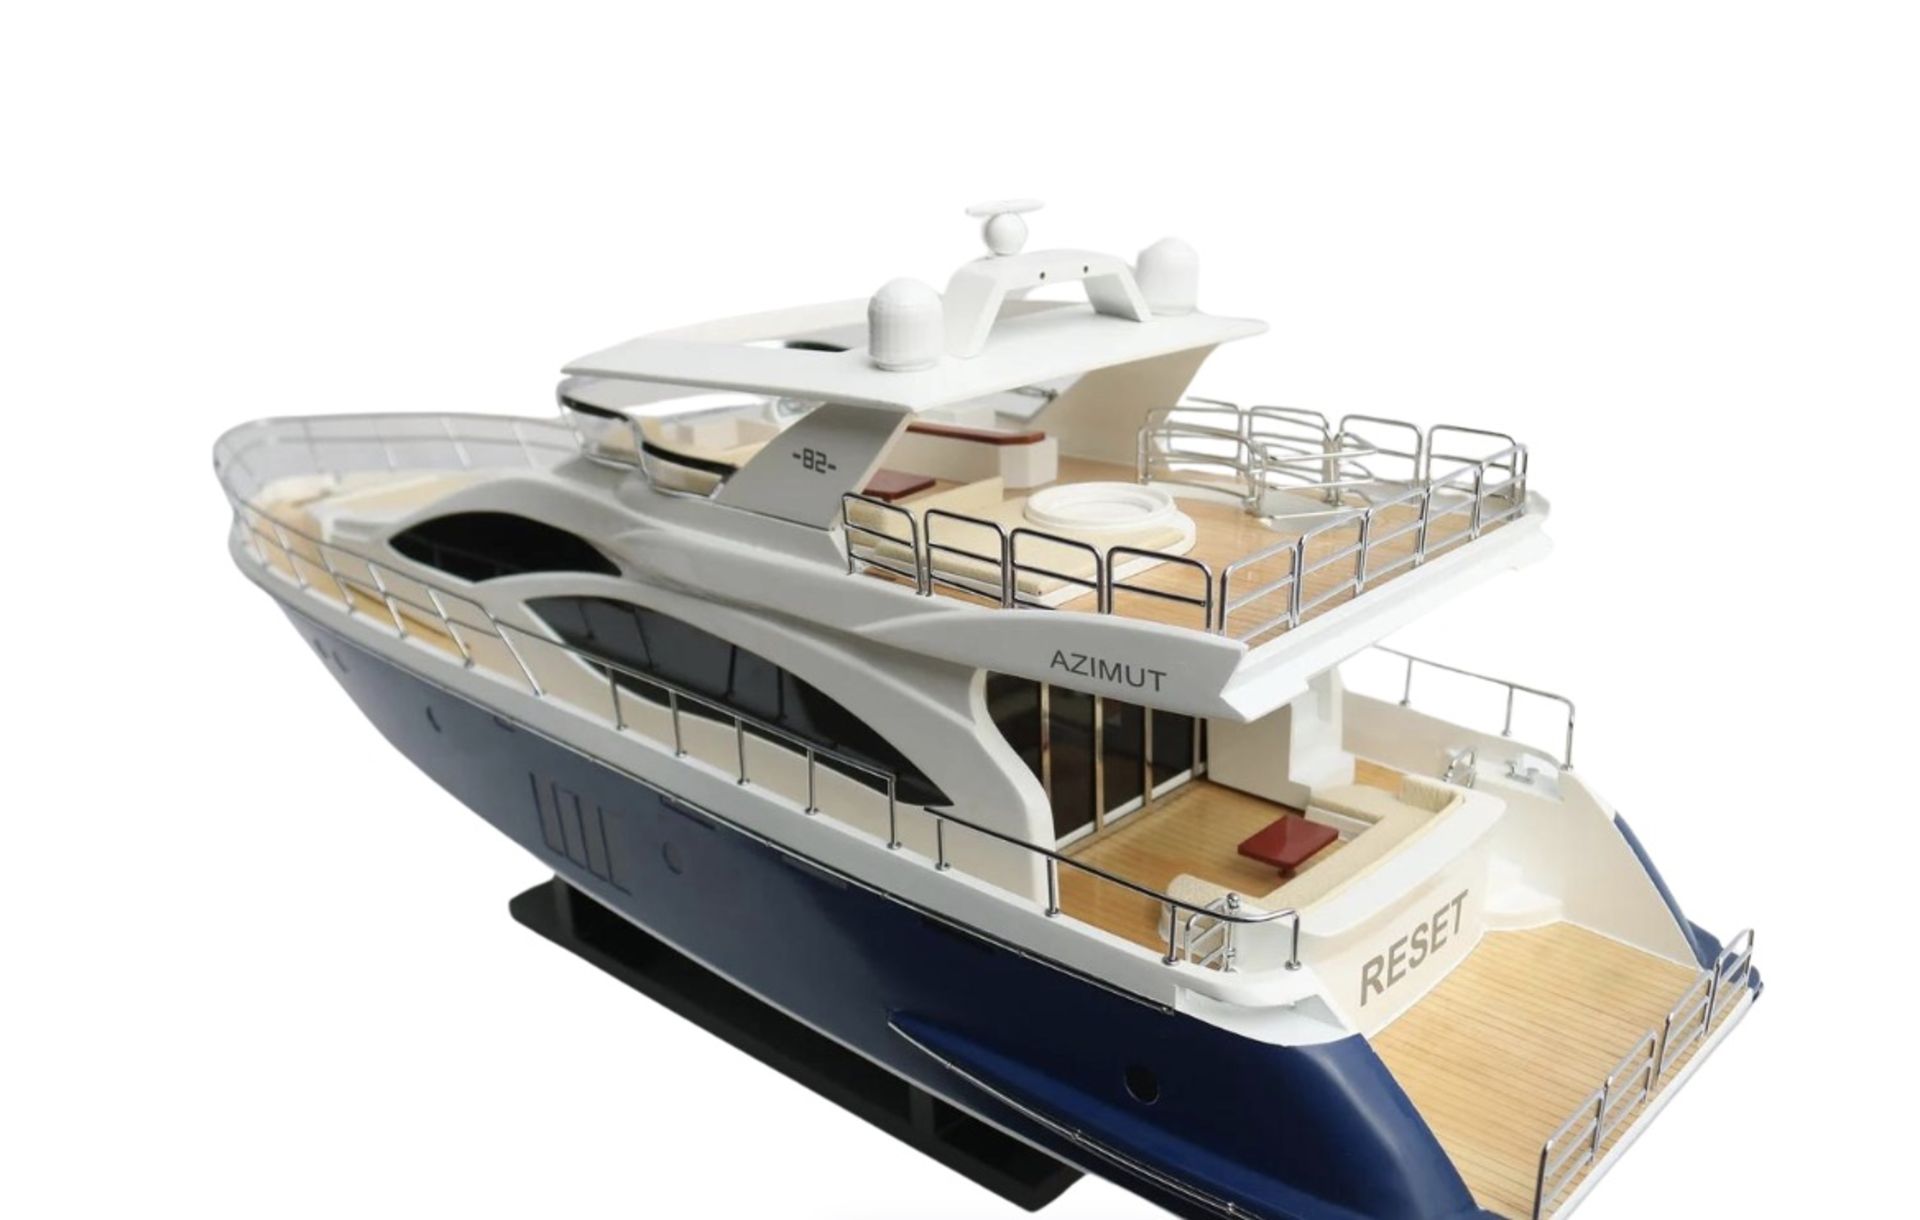 Azimut 82 Yacht Wooden Scale Desk Display Model - Image 8 of 10